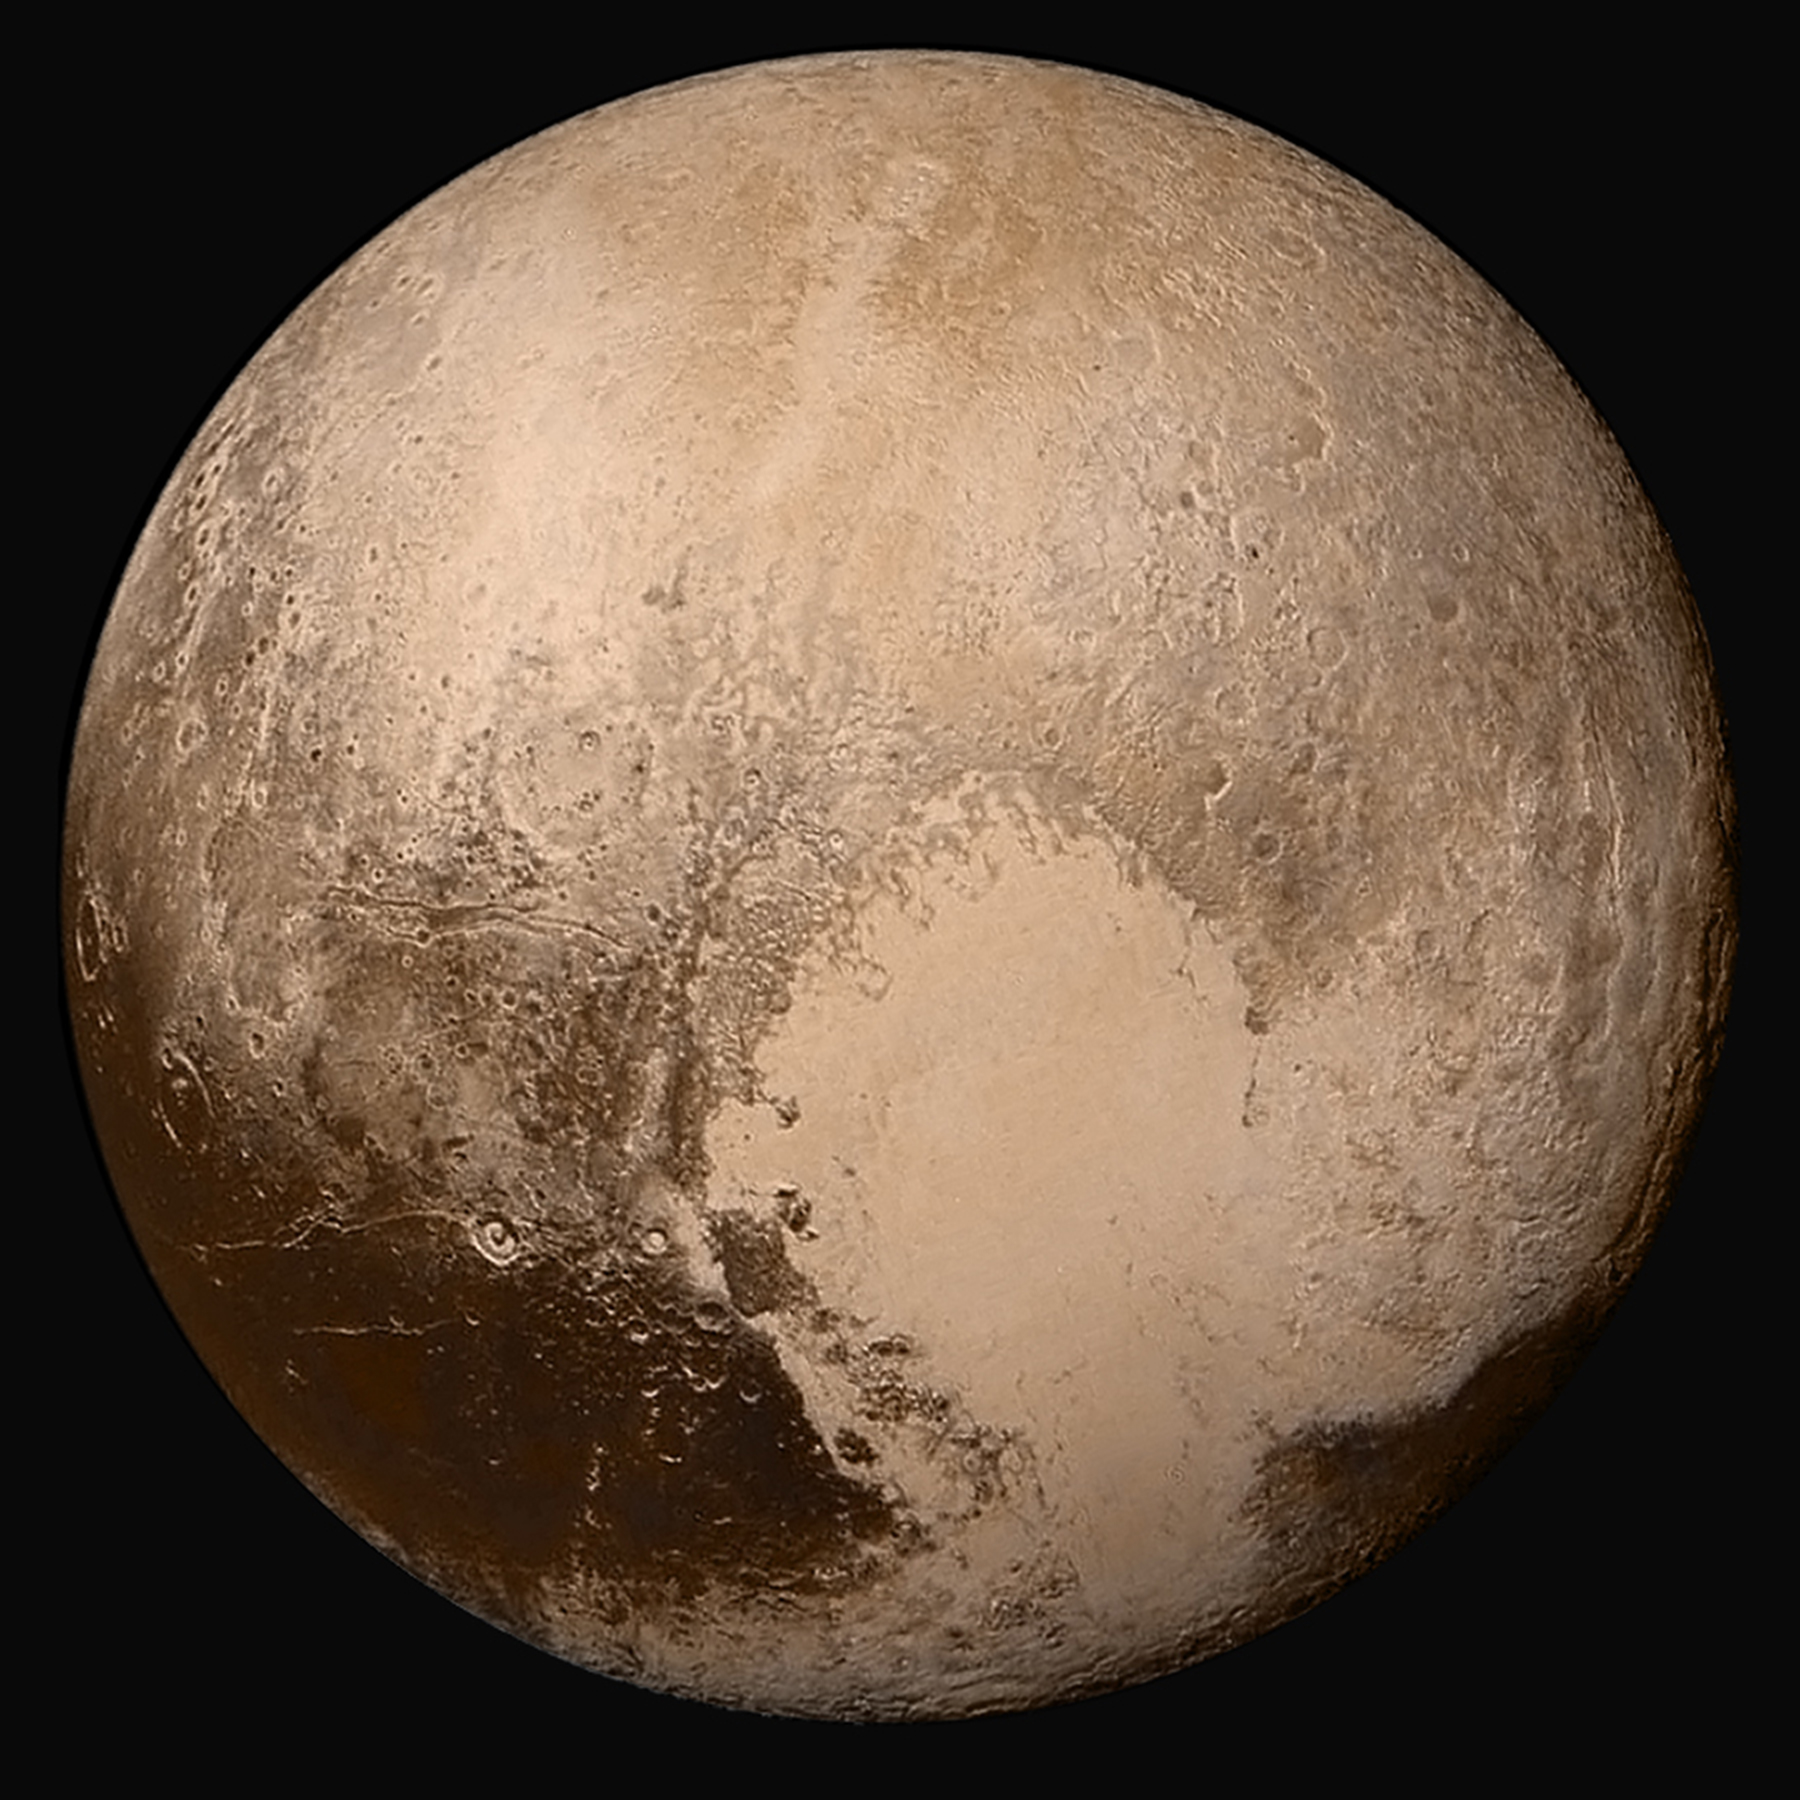 Nh-pluto-in-true-color_2x_JPEG (1)